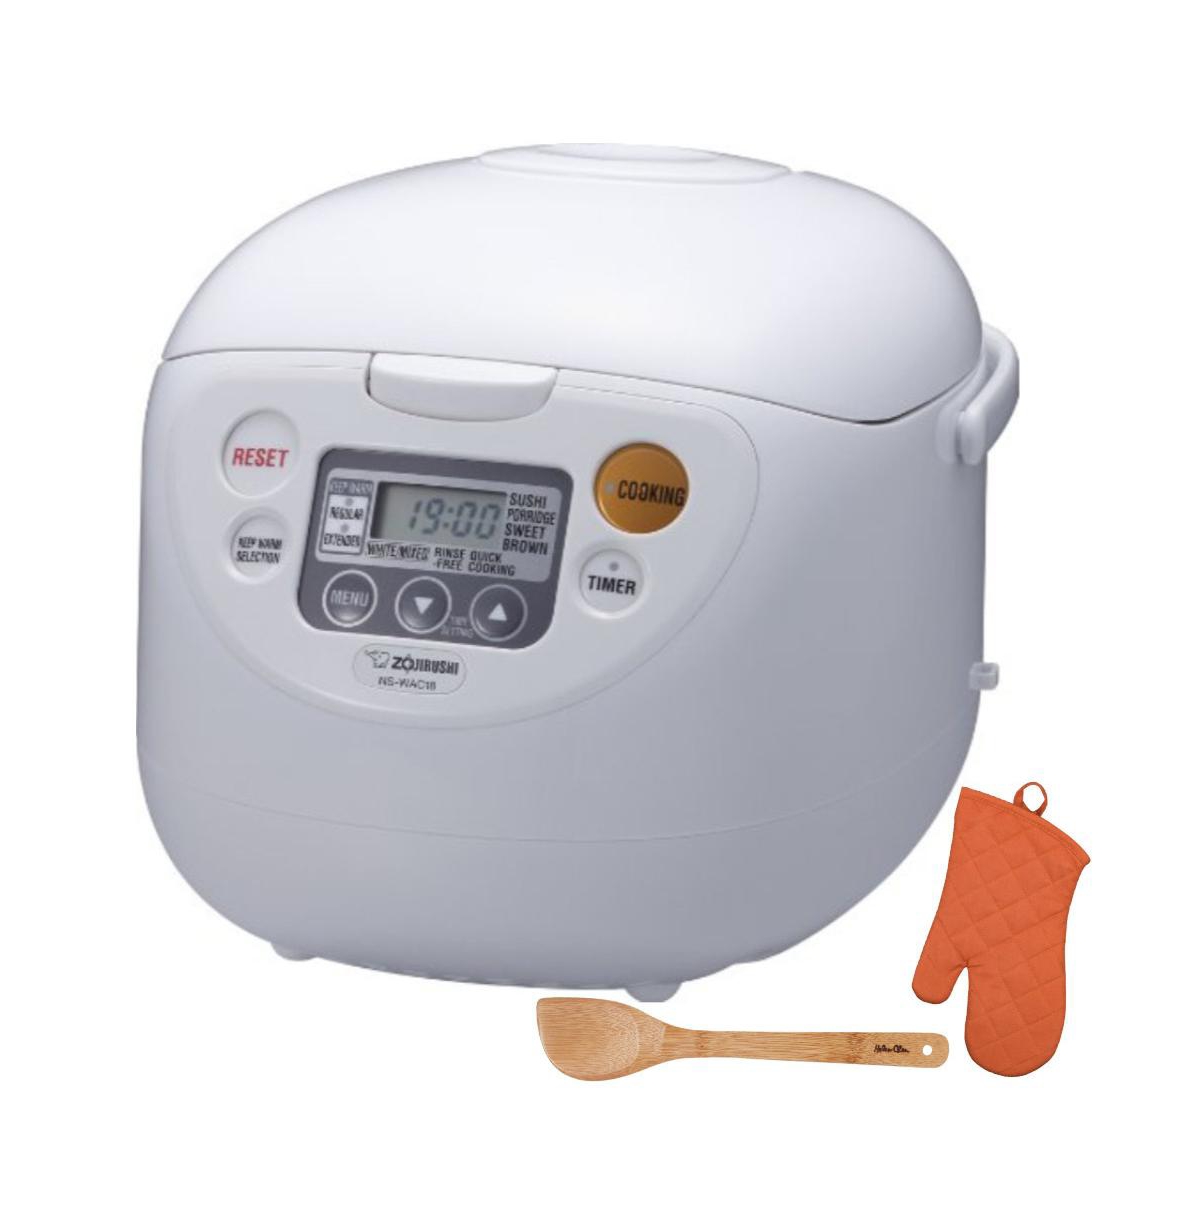 Micom Rice Cooker and Warmer (10-Cup/White) with Stir Spatula & Mitt - White